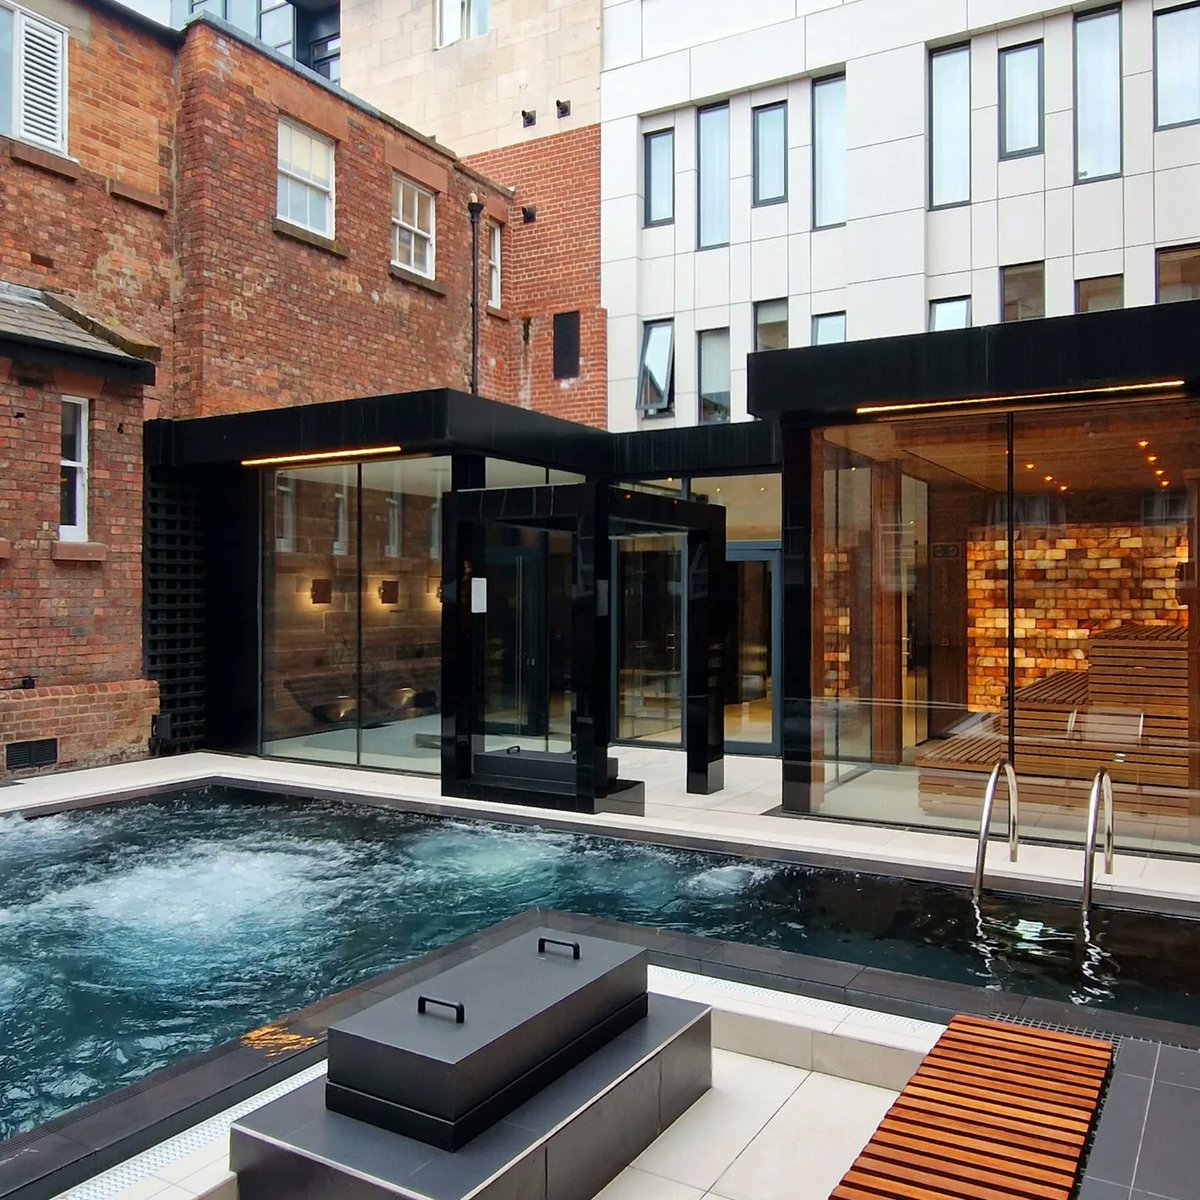 Book a fabulous break at Hope Street Hotel! Relax in our award-winning spa, dine in one (or both) of our restaurants and enjoy all the city has to offer! Take a look at our full range of offers - hopestreethotel.co.uk/offers